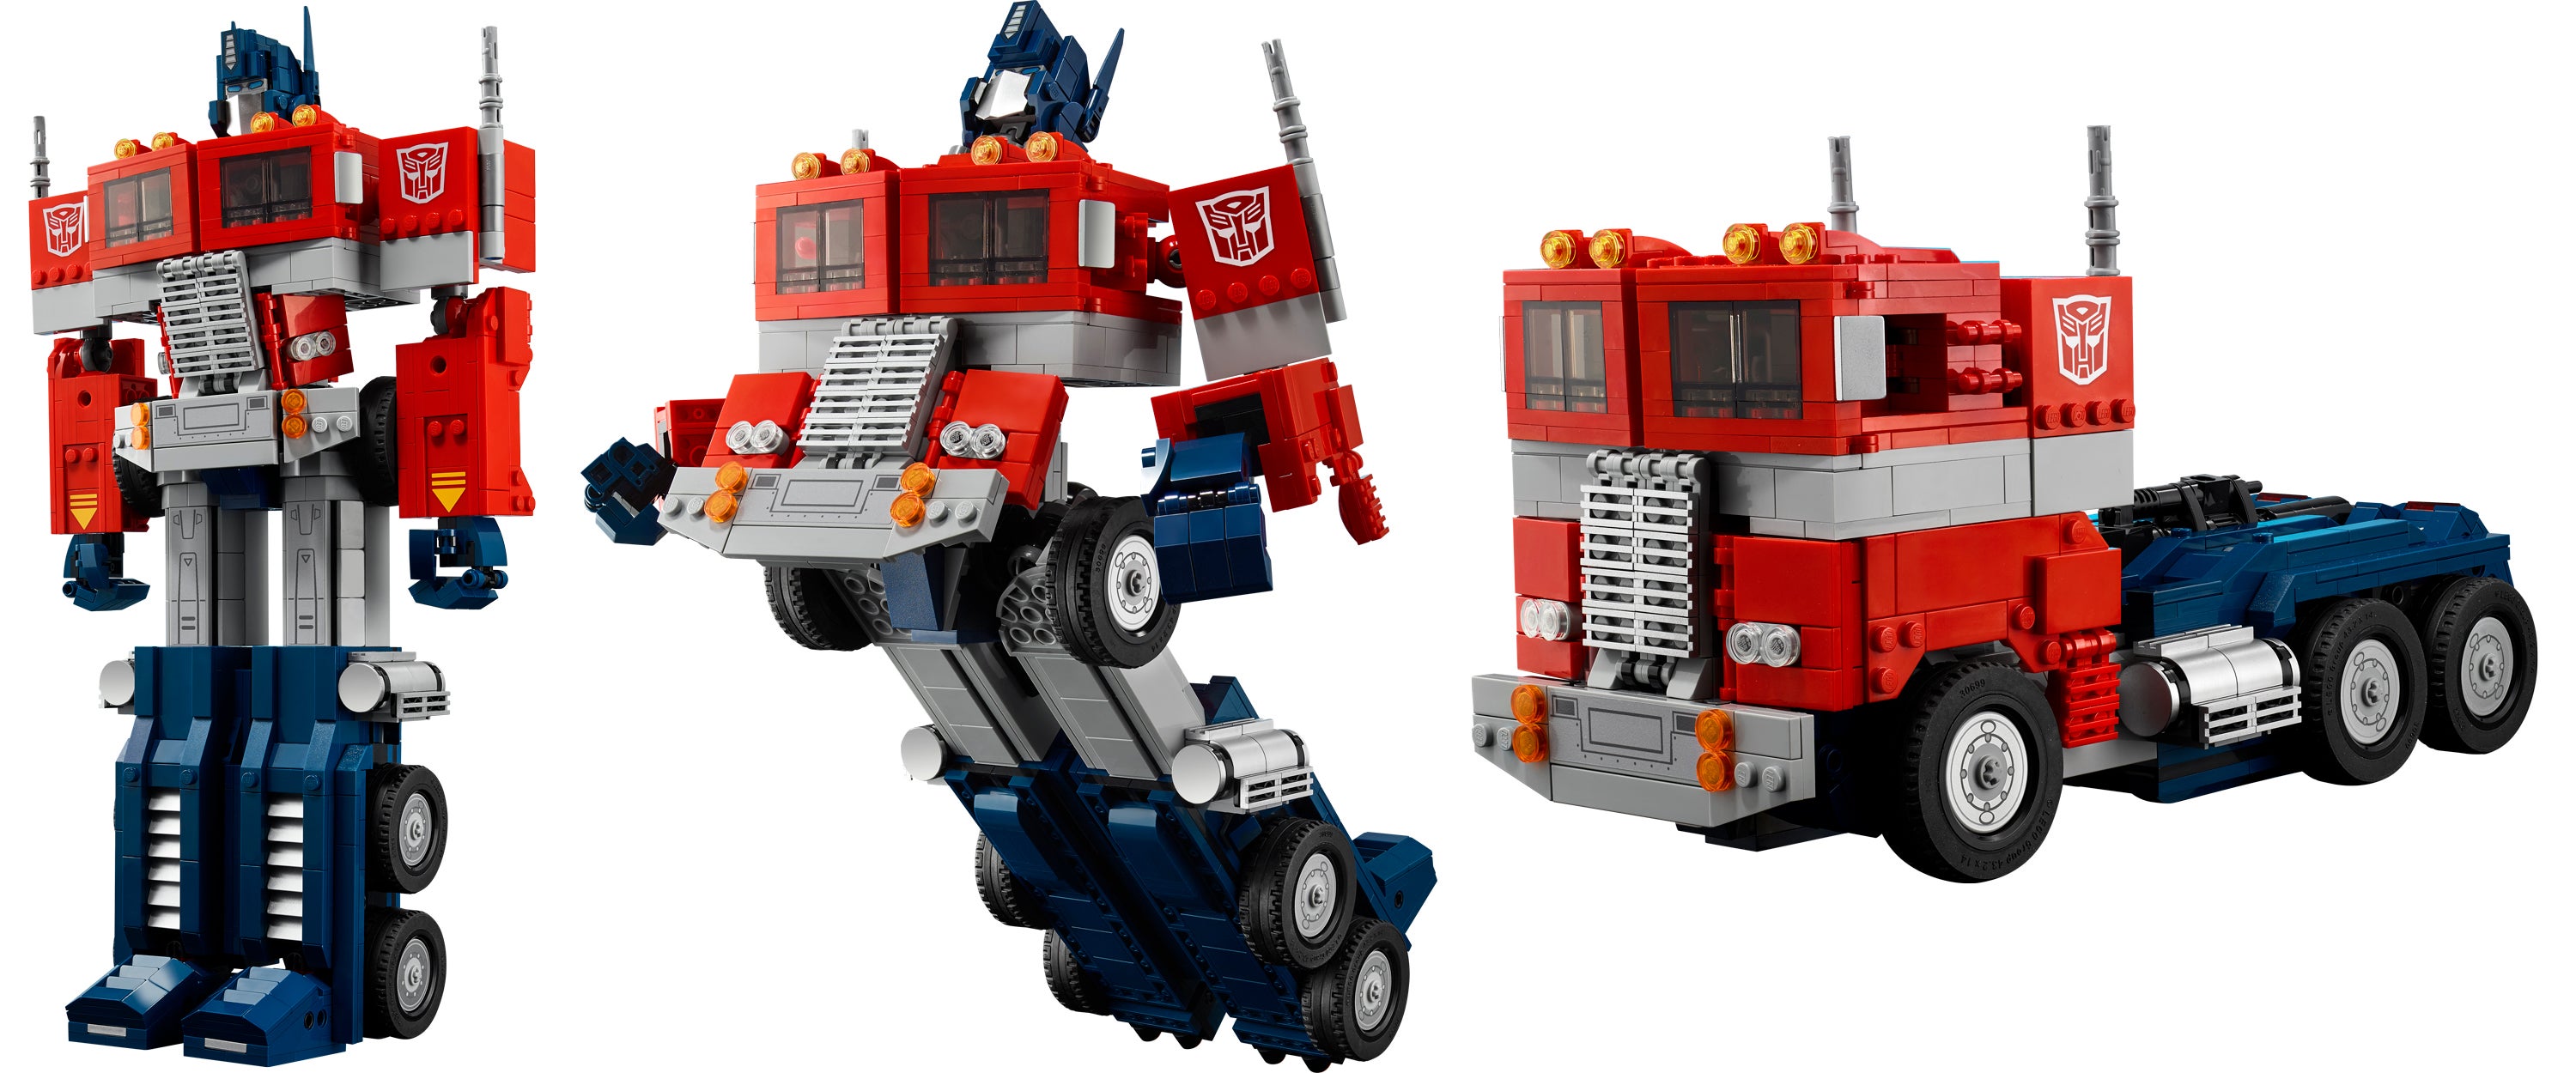 LEGO Optimus Prime Is a Flawless Retro Toy Mashup That Actually Transforms